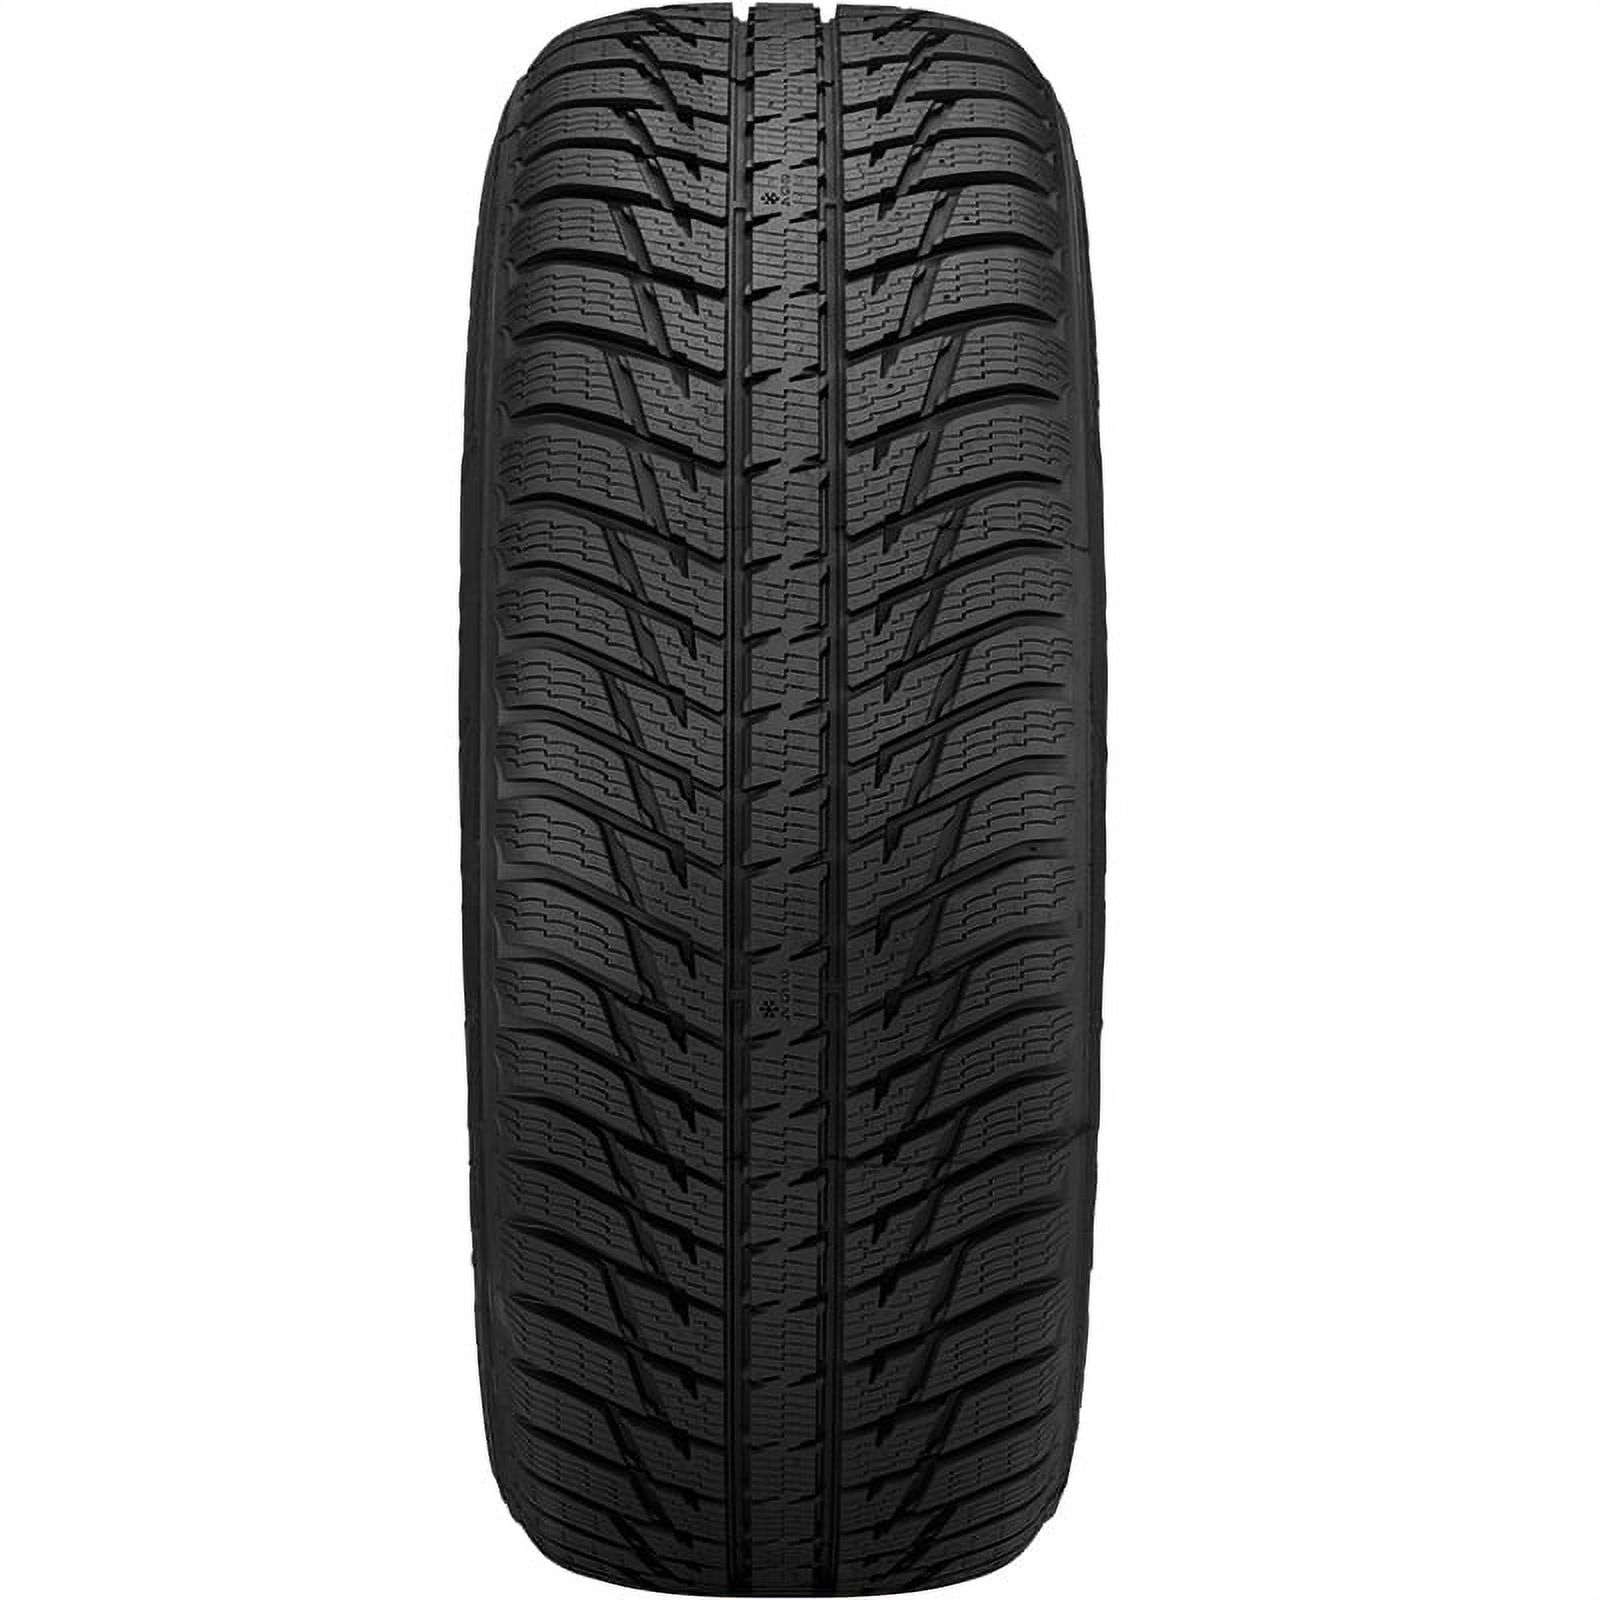 Nokian WRG3 SUV 245/55R19 103 H Tire - image 3 of 4